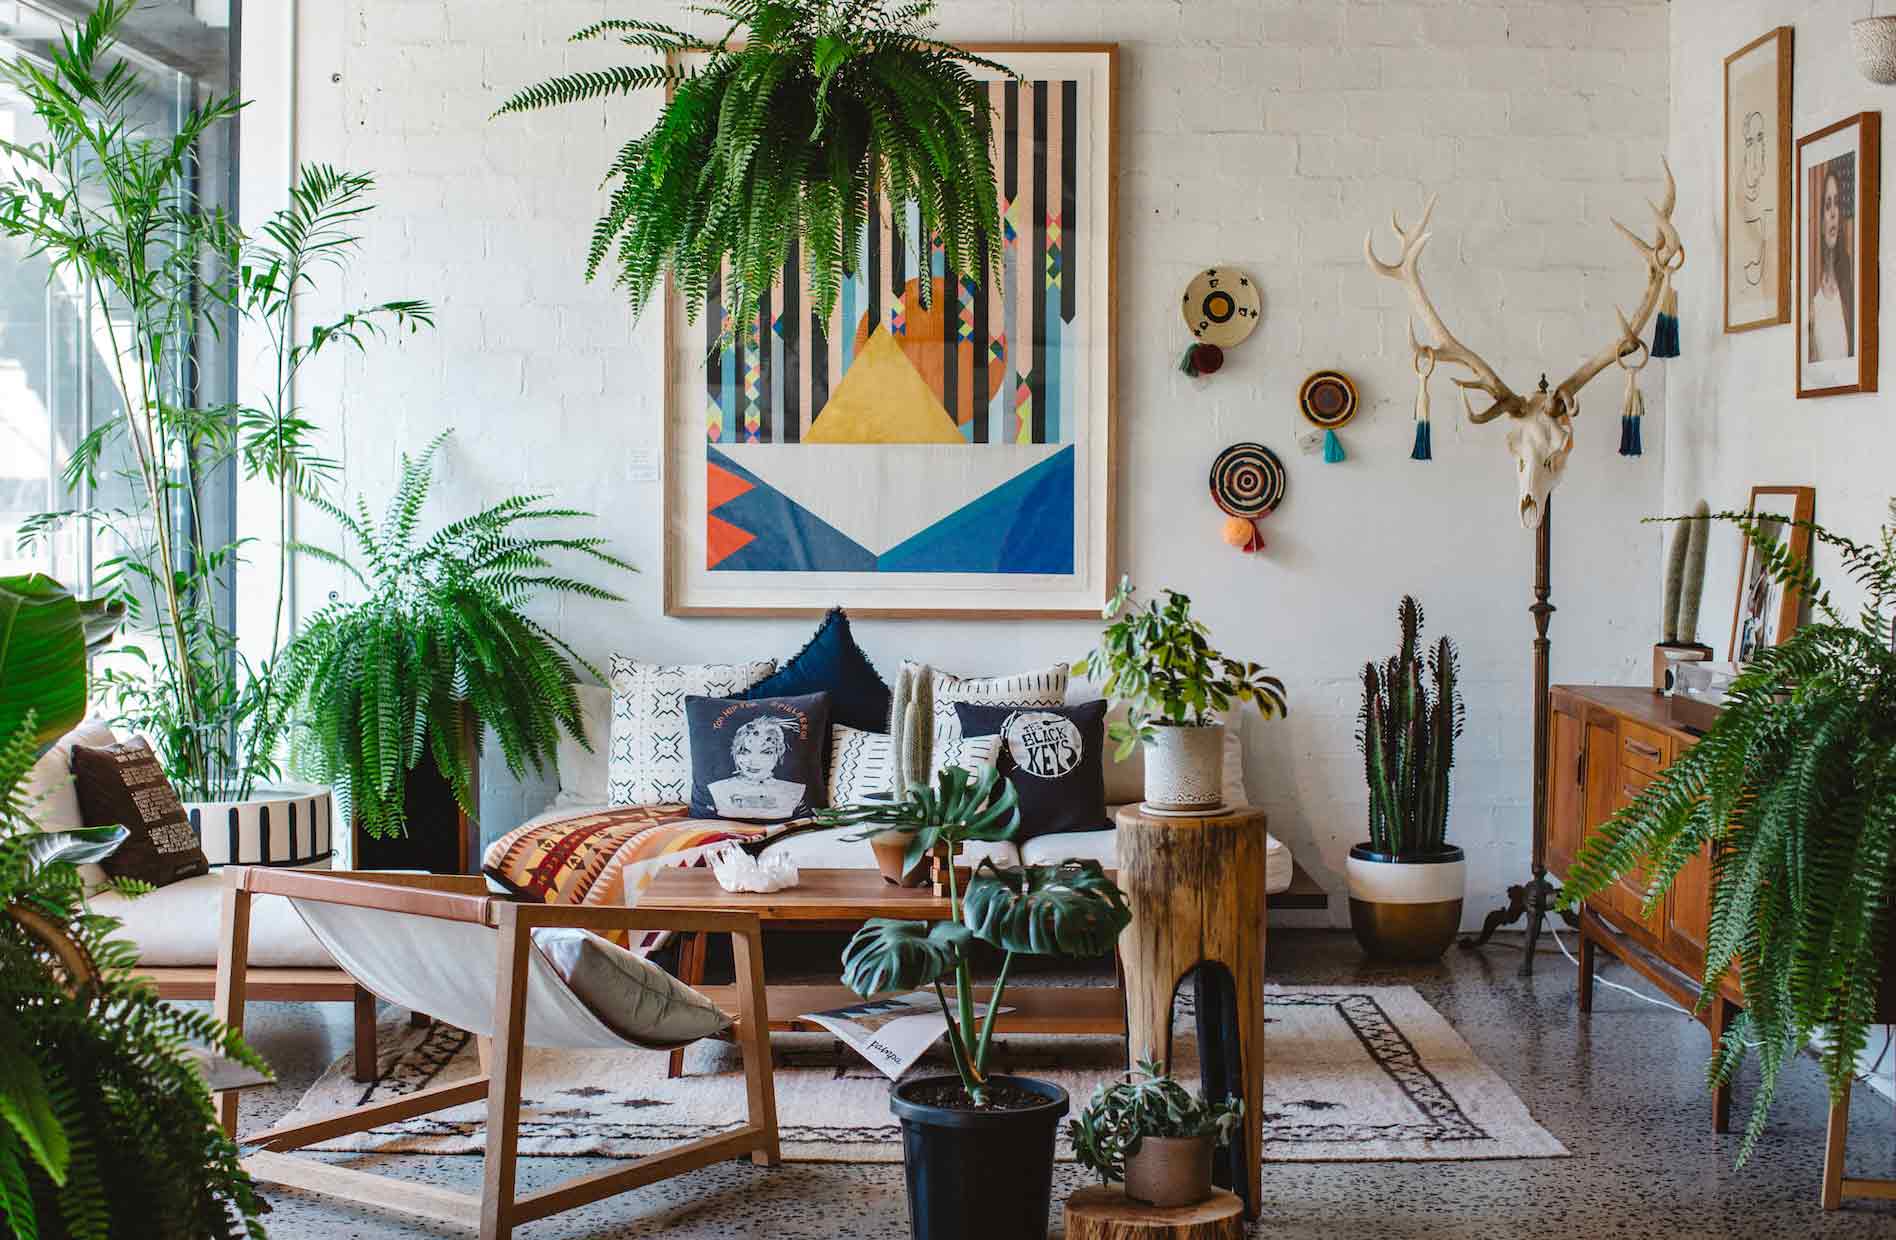 Spacious living room with wooden furniture, wall art, and many green plants